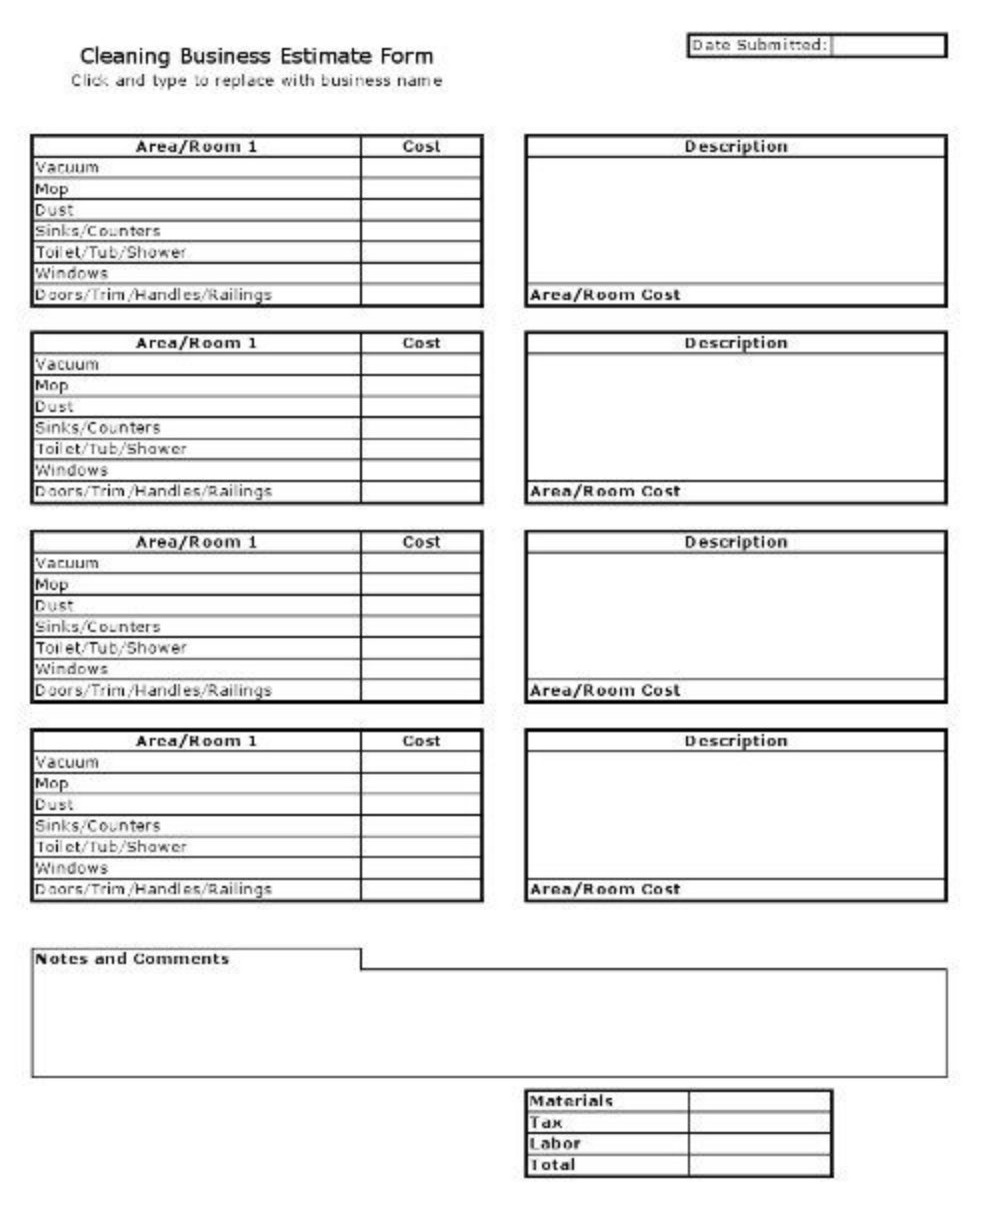 Sample Cleaning Business Estimate Form